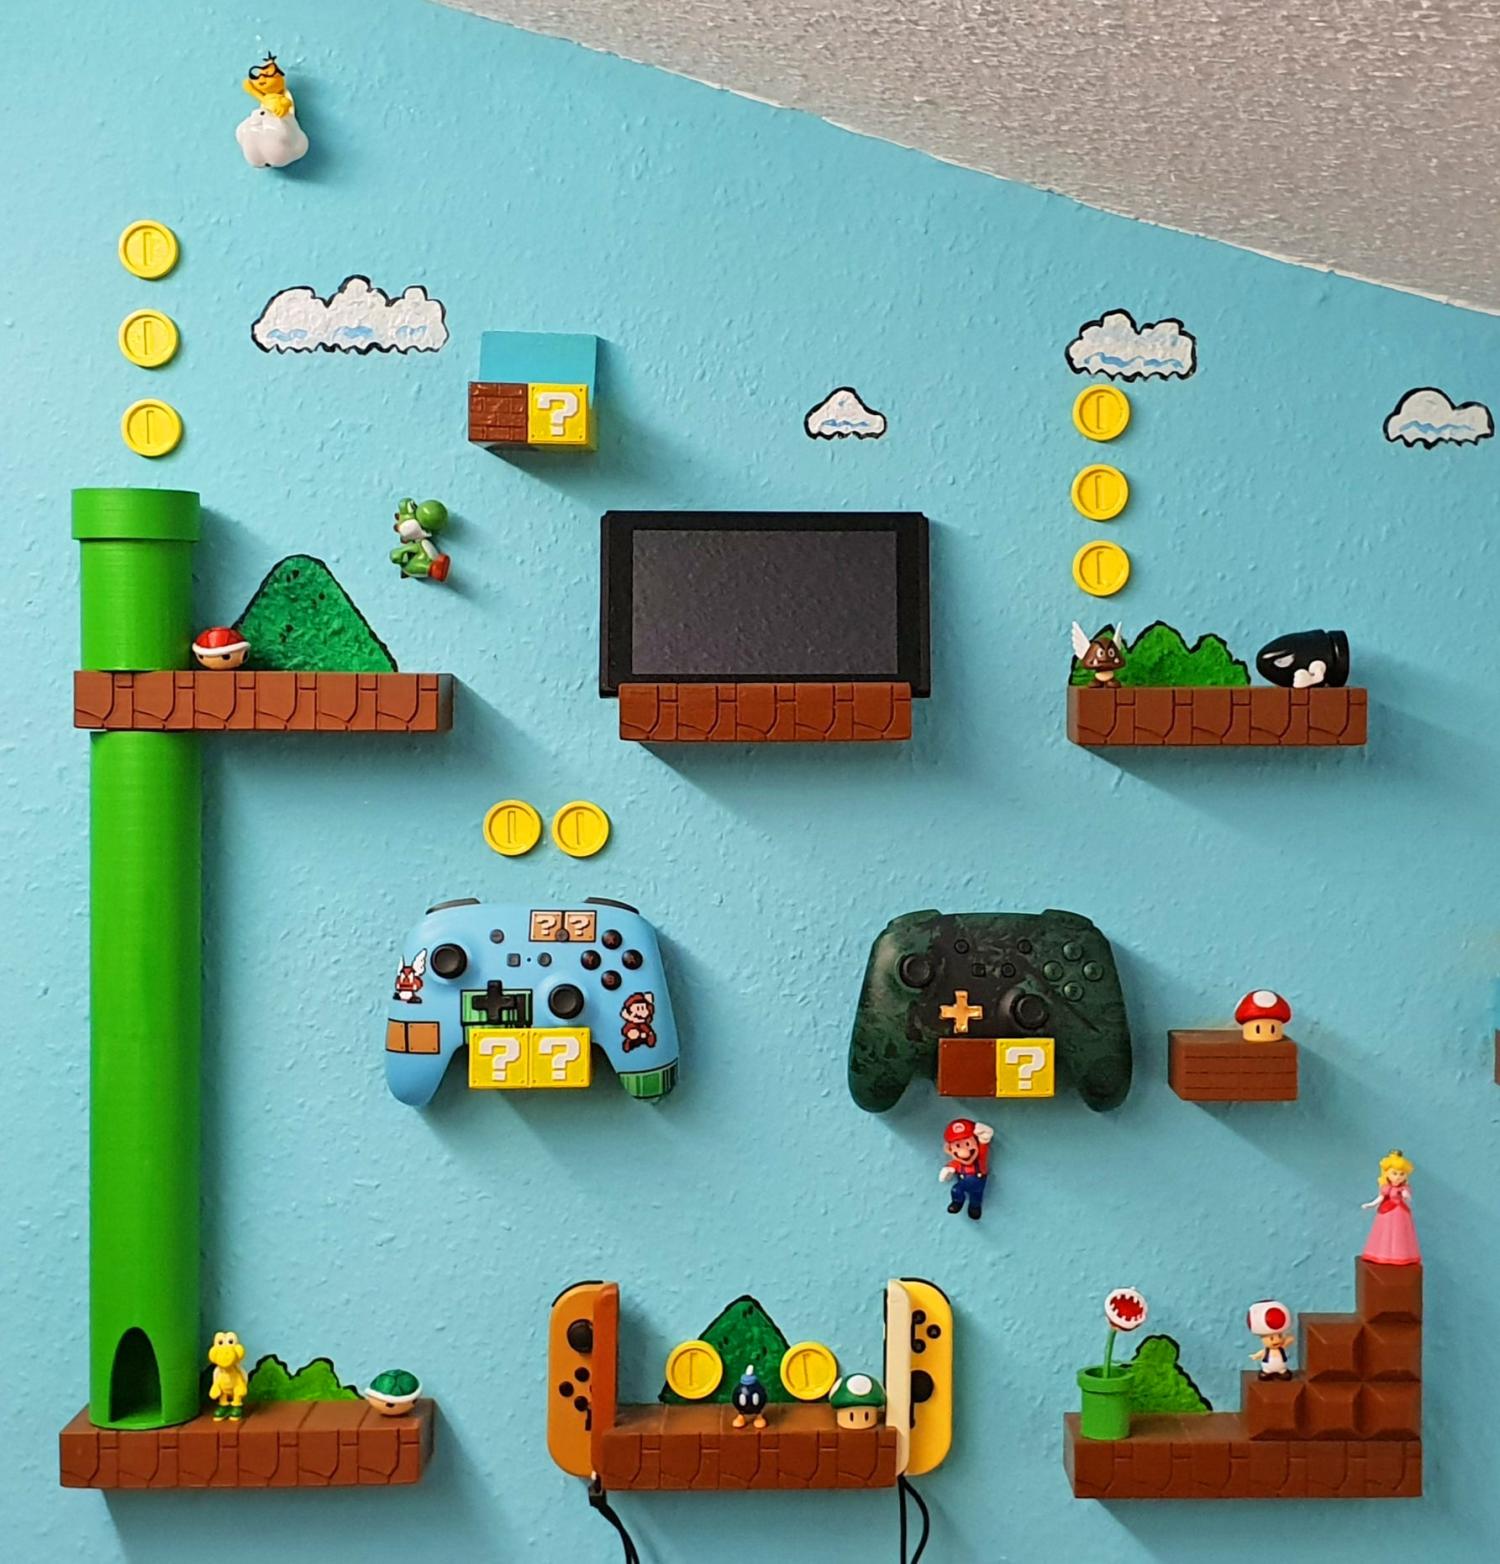 Super Mario Wall mounted game controllers holders - 3D mario level on wall